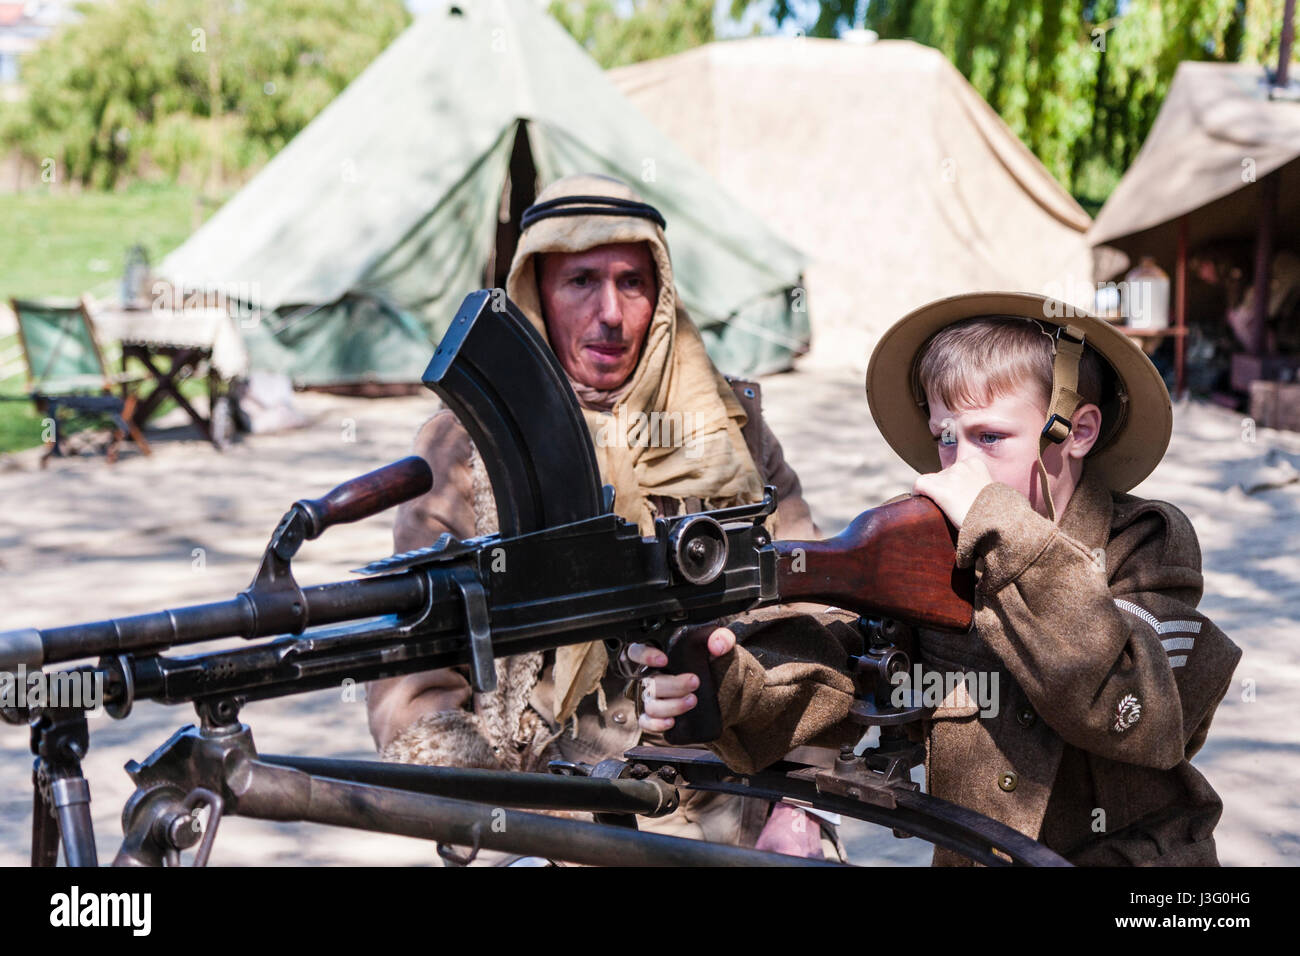 Salute to the 40s re-enactment. Child, blonde boy, 6-7 years old, in British army uniform, being shown how to fire Bren gun by Desert Rat soldier. Stock Photo